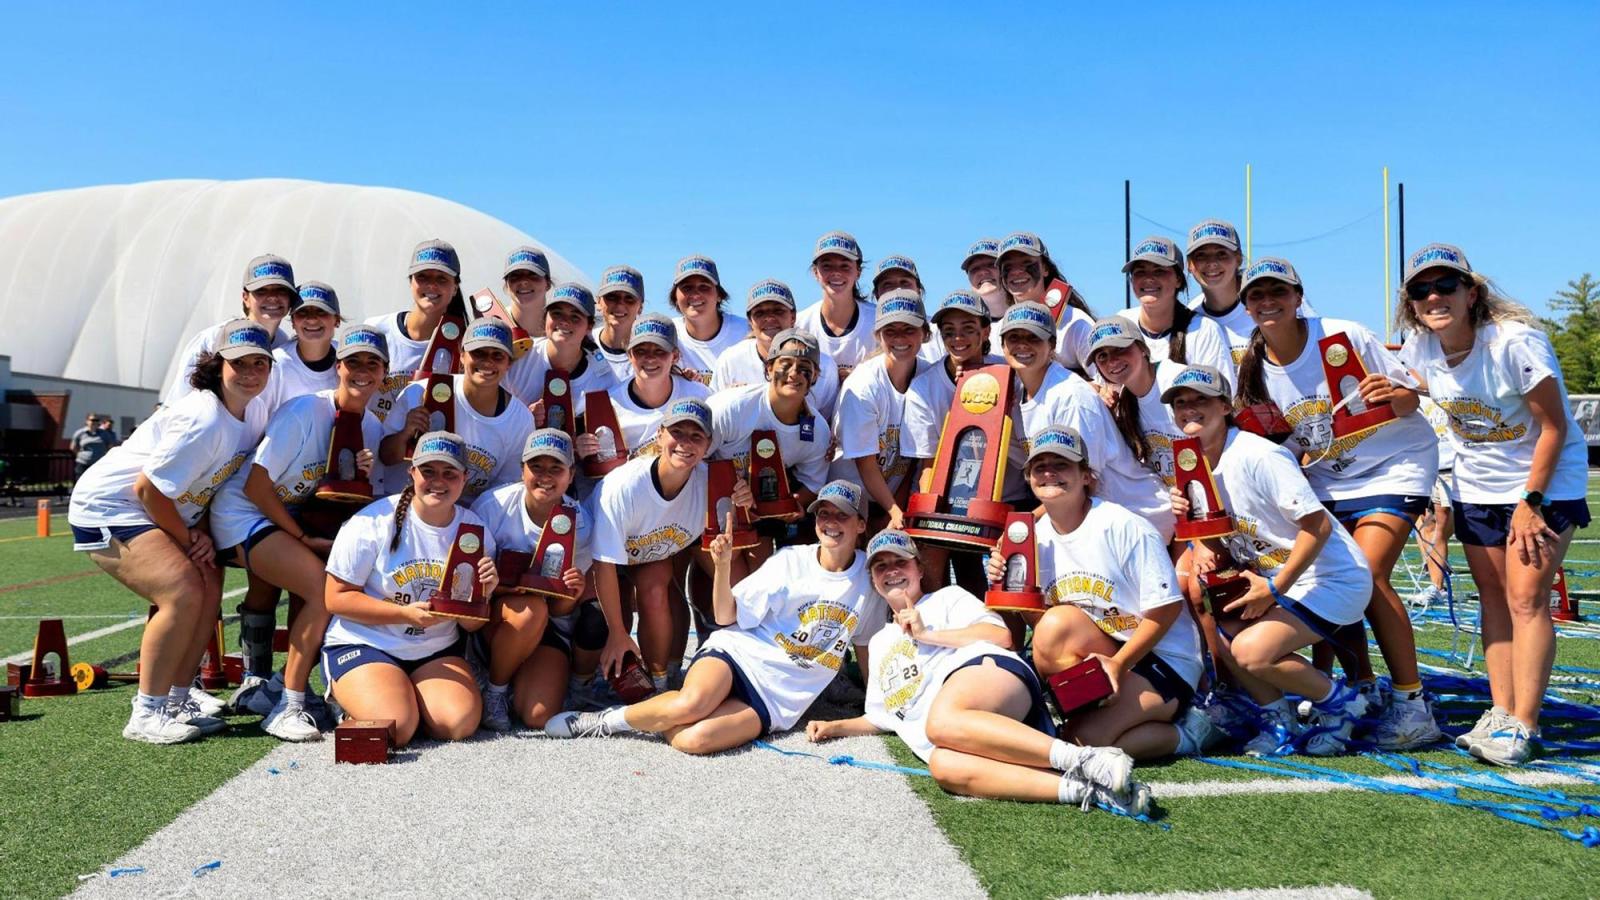 Women's lacrosse team celebrating their national championship victory